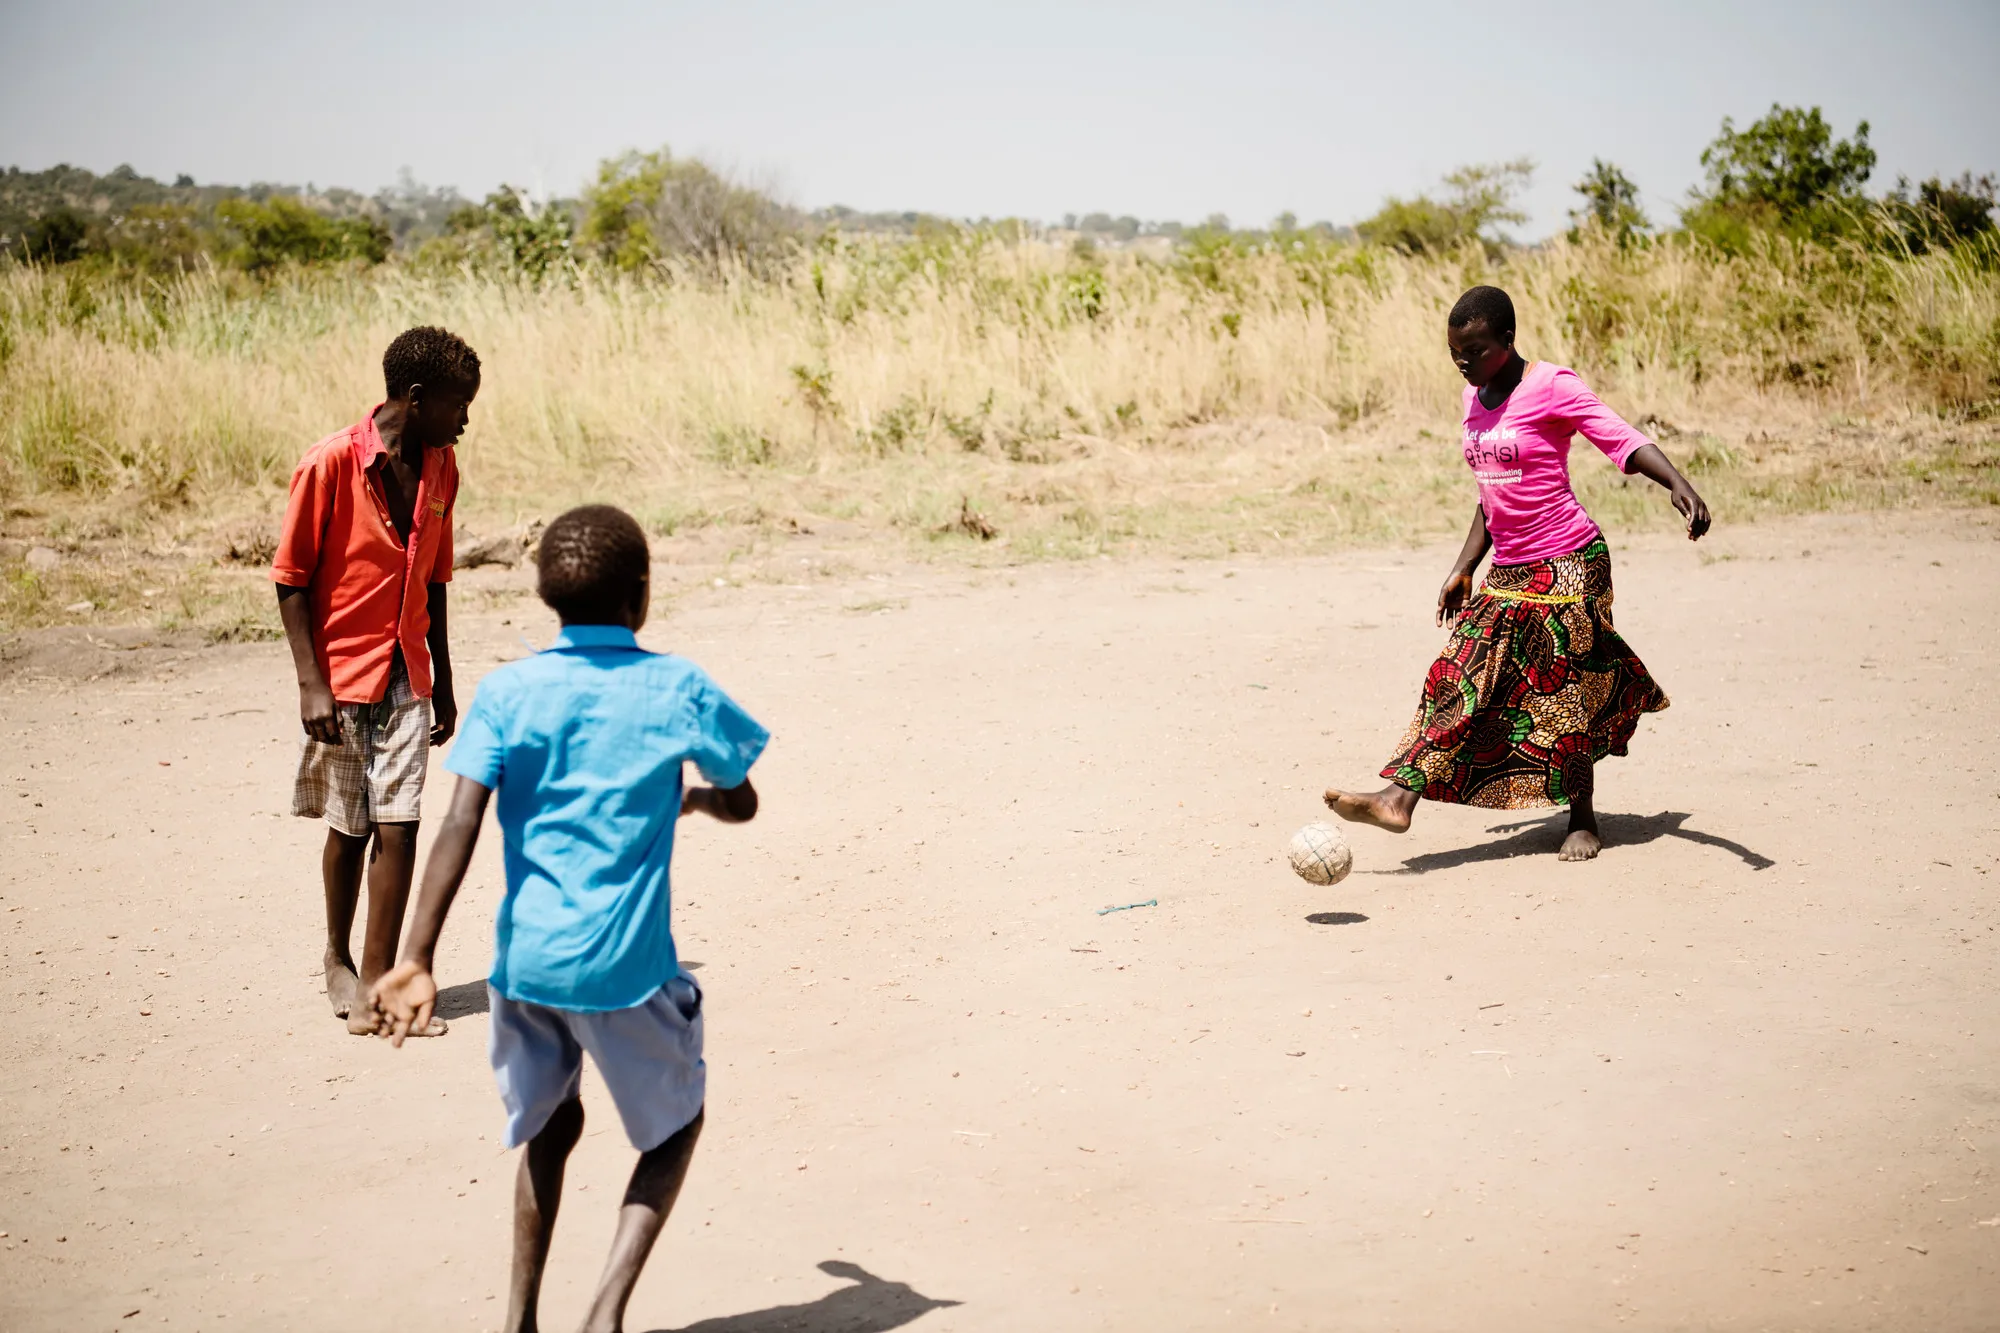 Girl playing soccer on a dirt field with two boys